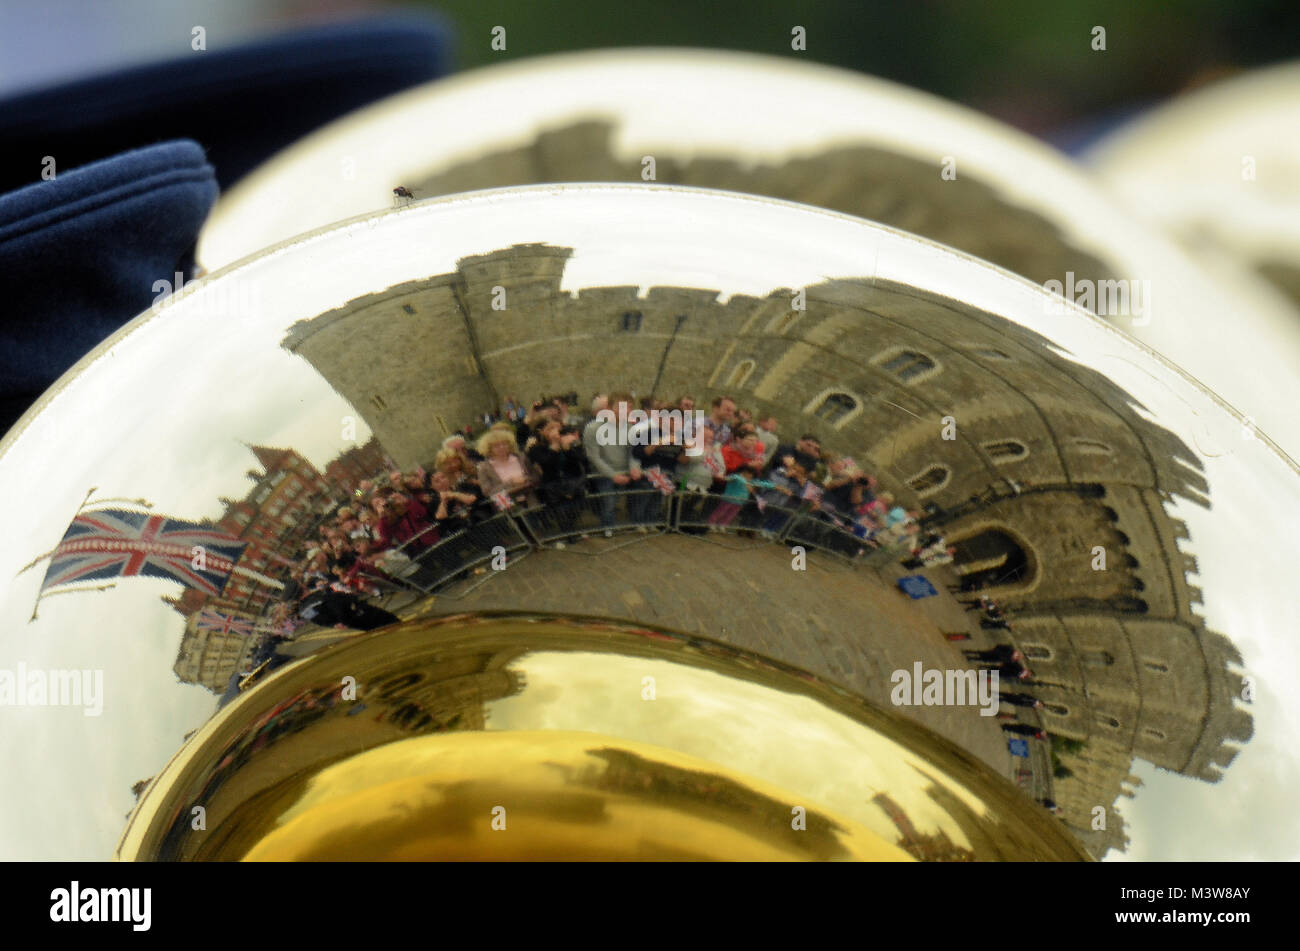 Windsor Castle and people reflected in a brass instrument of a marching band celebrating Queen Elizabeth's Diamond Jubilee Stock Photo